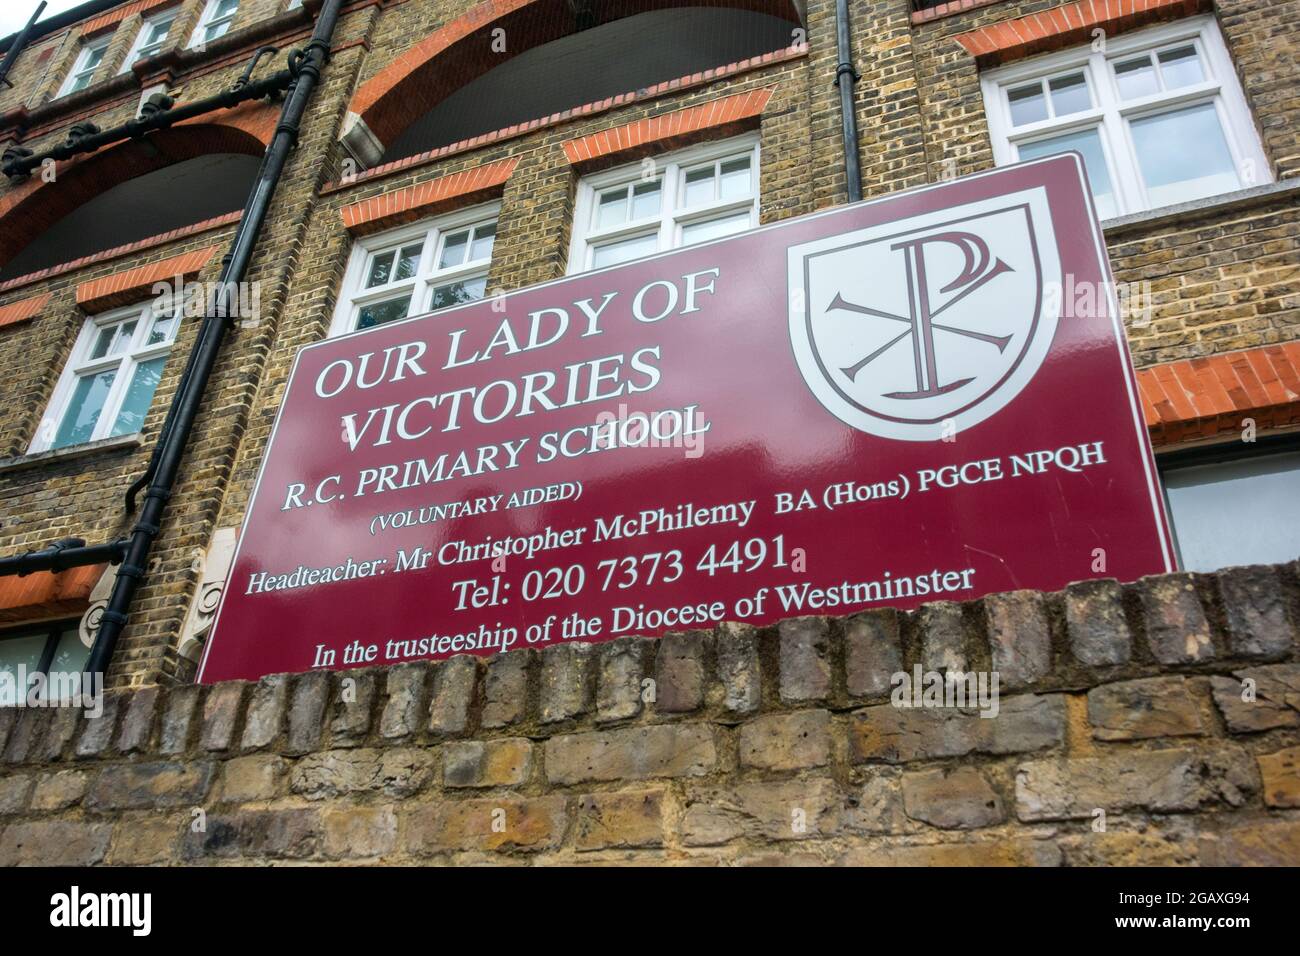 Our Lady of Victories RC Primary School, Chelsea, London Stock Photo